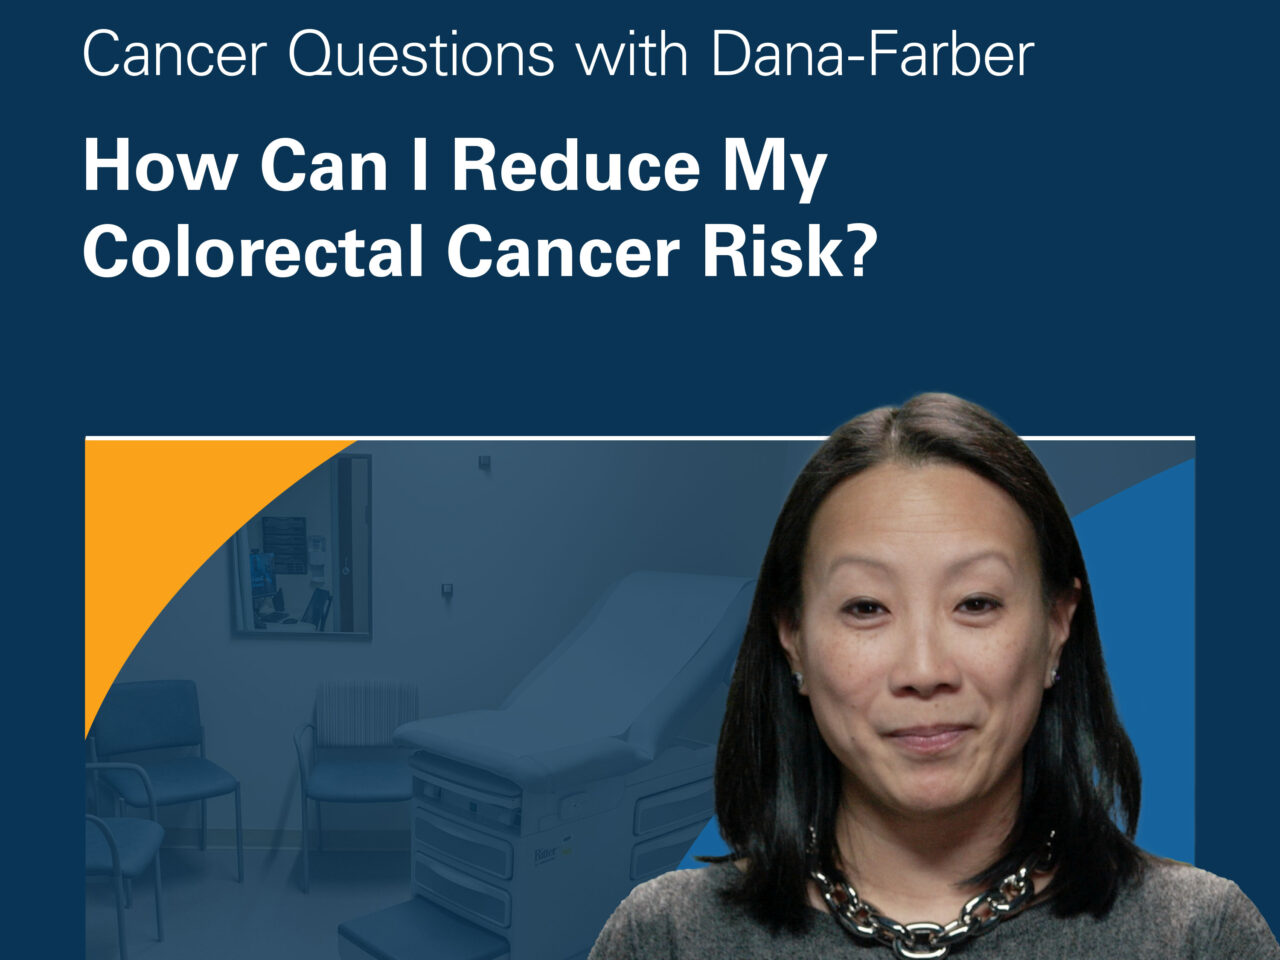 How can I reduce my colorectal cancer risk? – Dana-Farber Cancer Institute